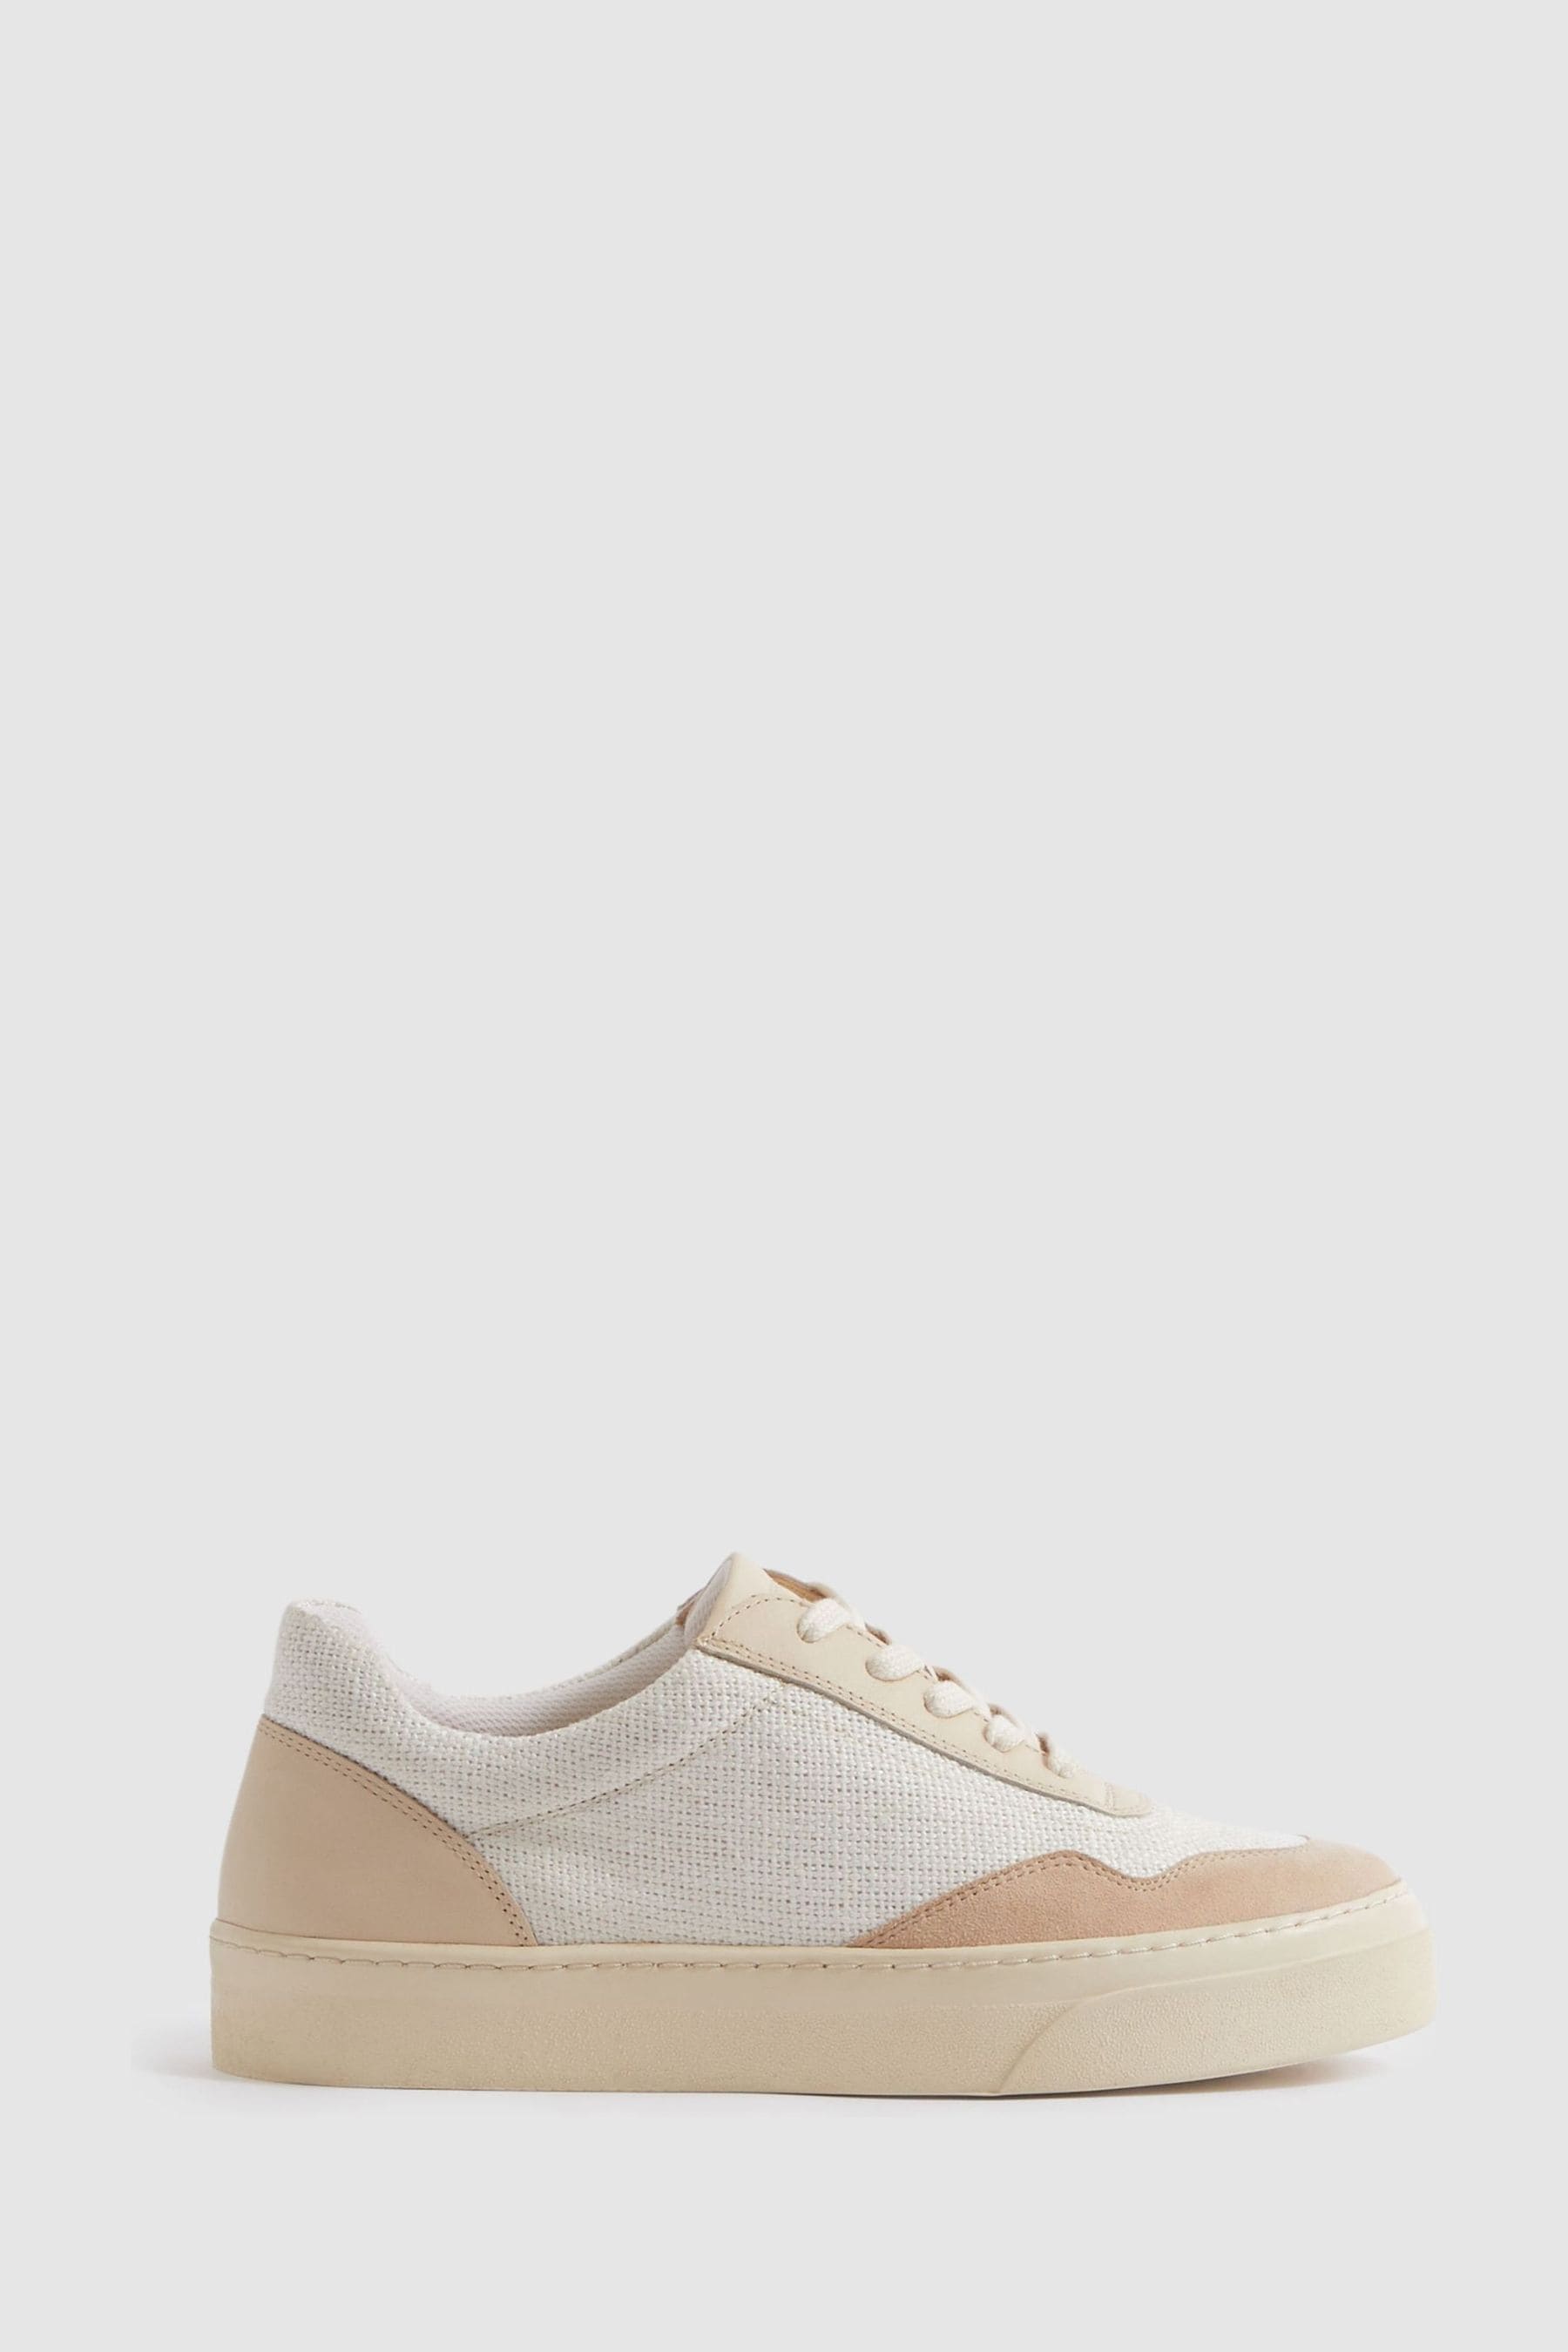 Reiss Asha - Natural Canvas Leather Chunky Trainers, Us 6